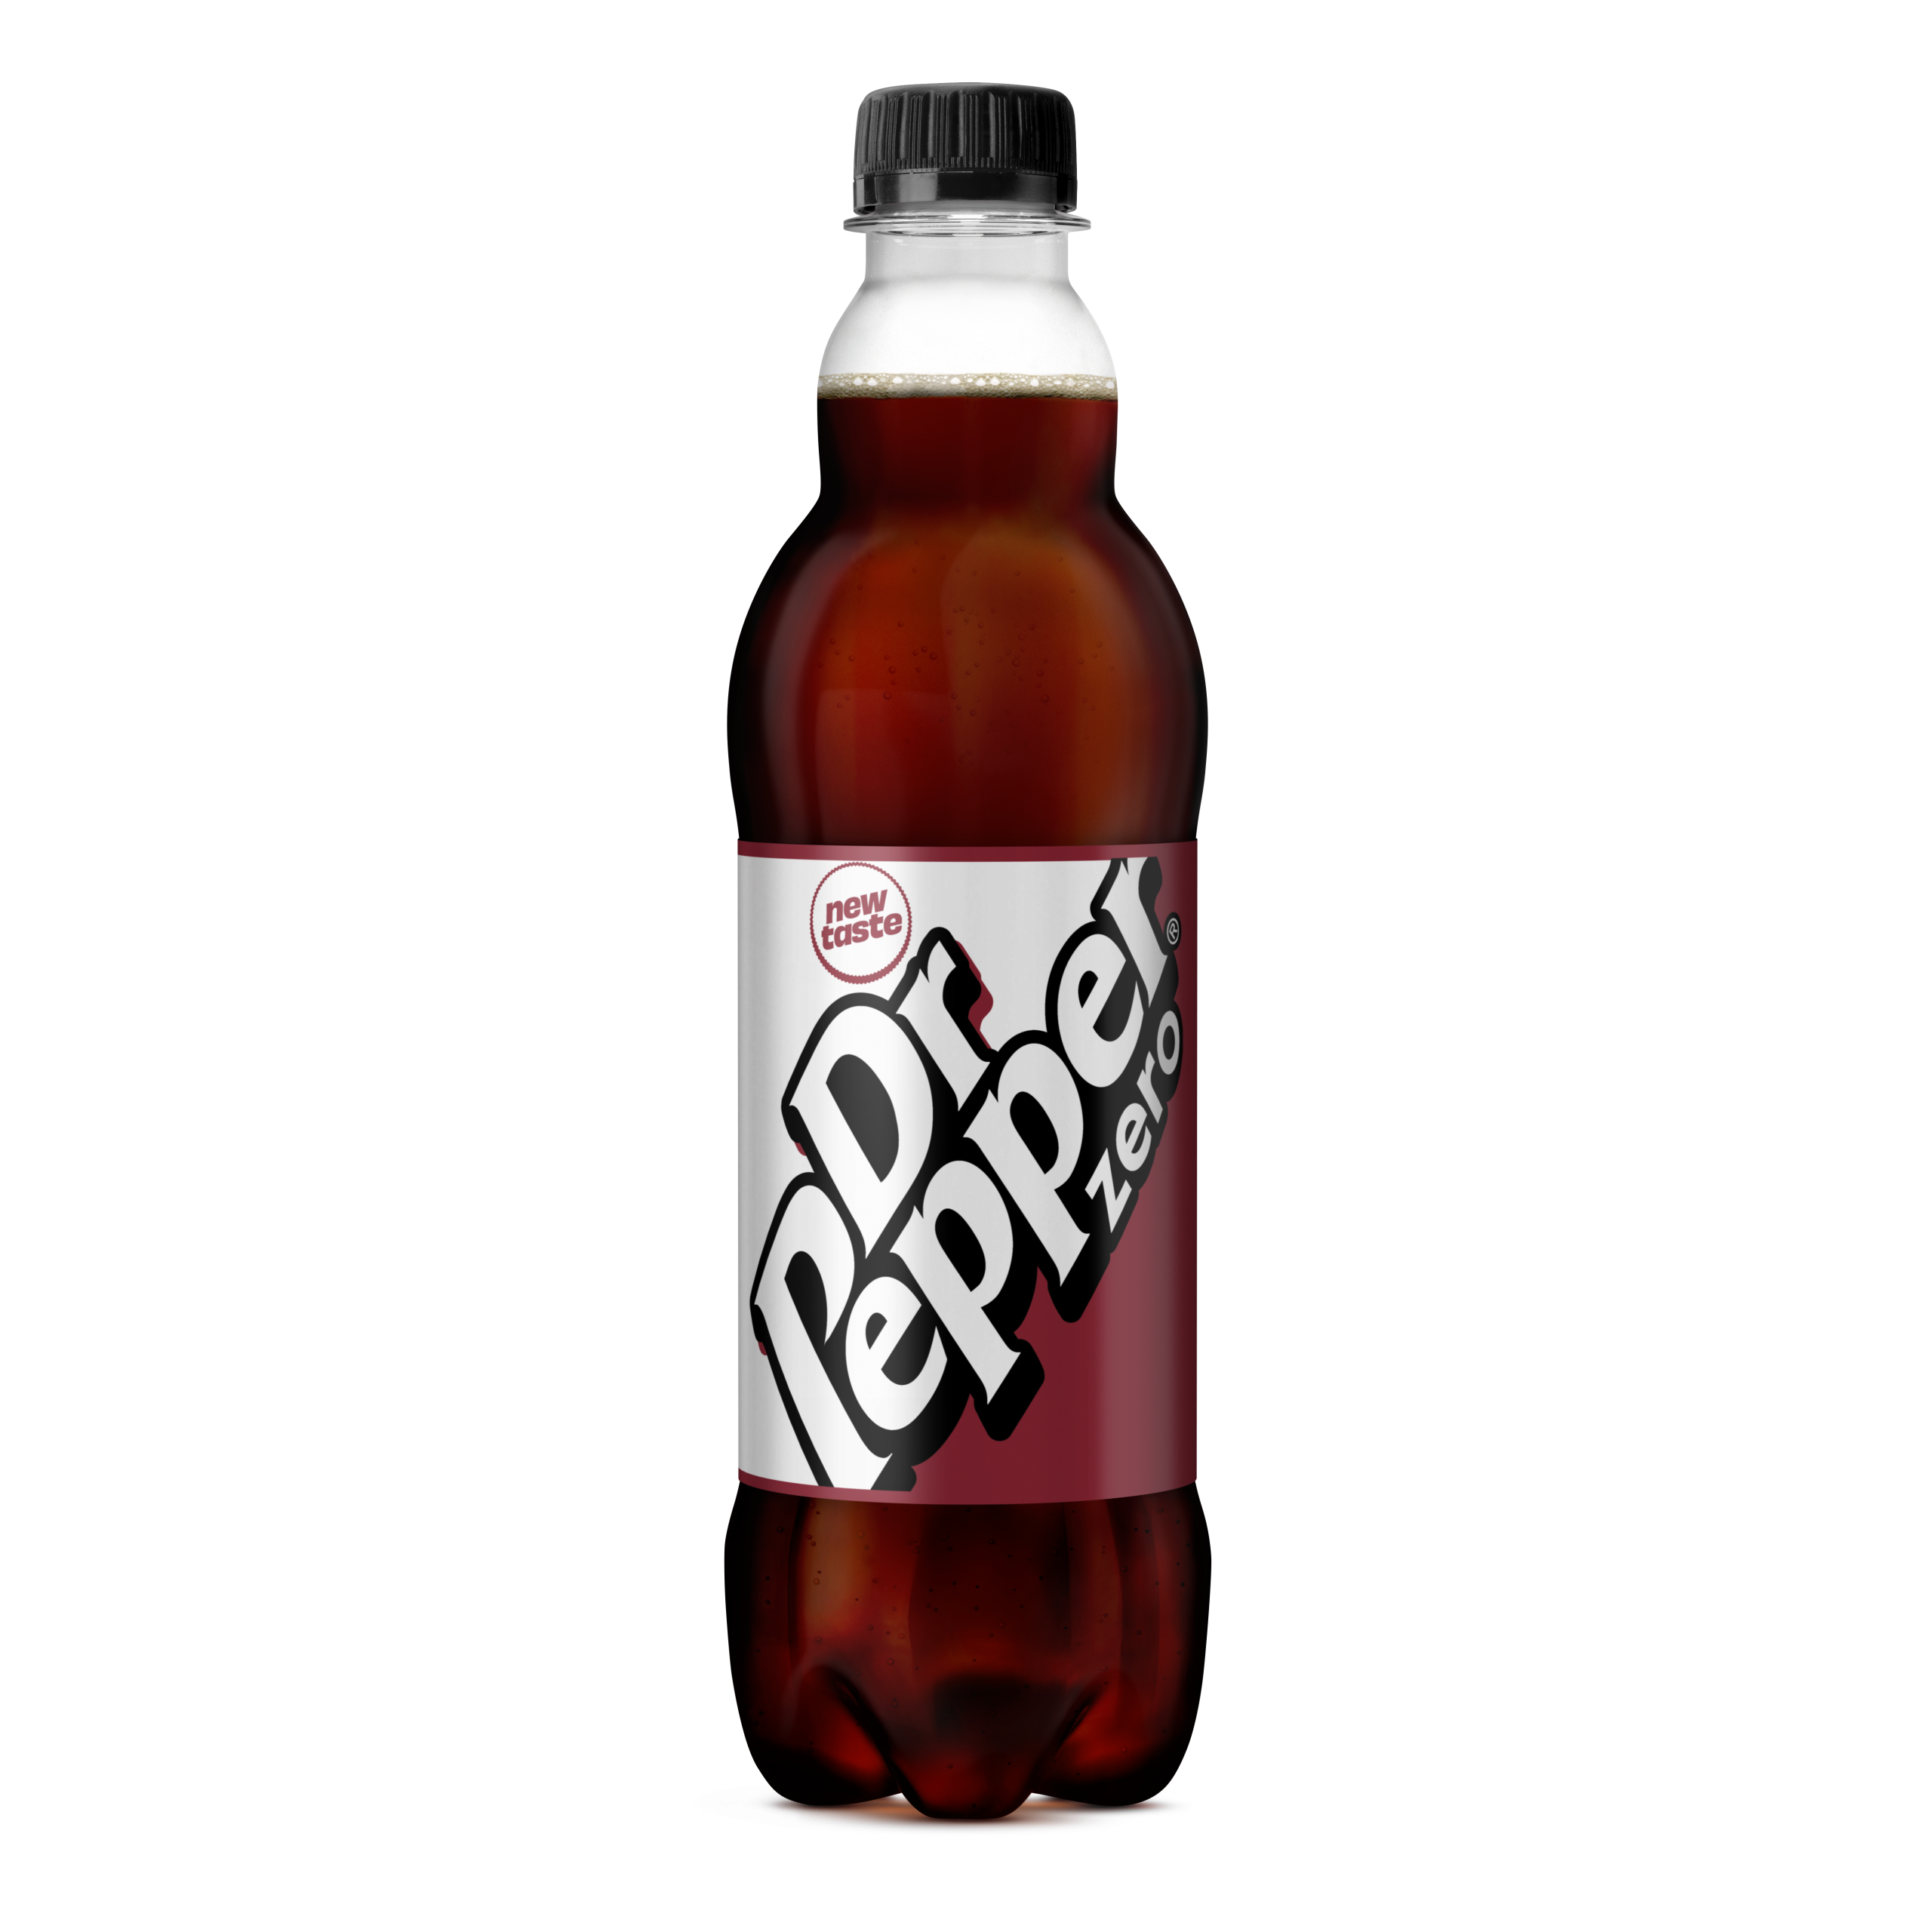 Dr Pepper Zero launches new taste – with sampling and marketing activity